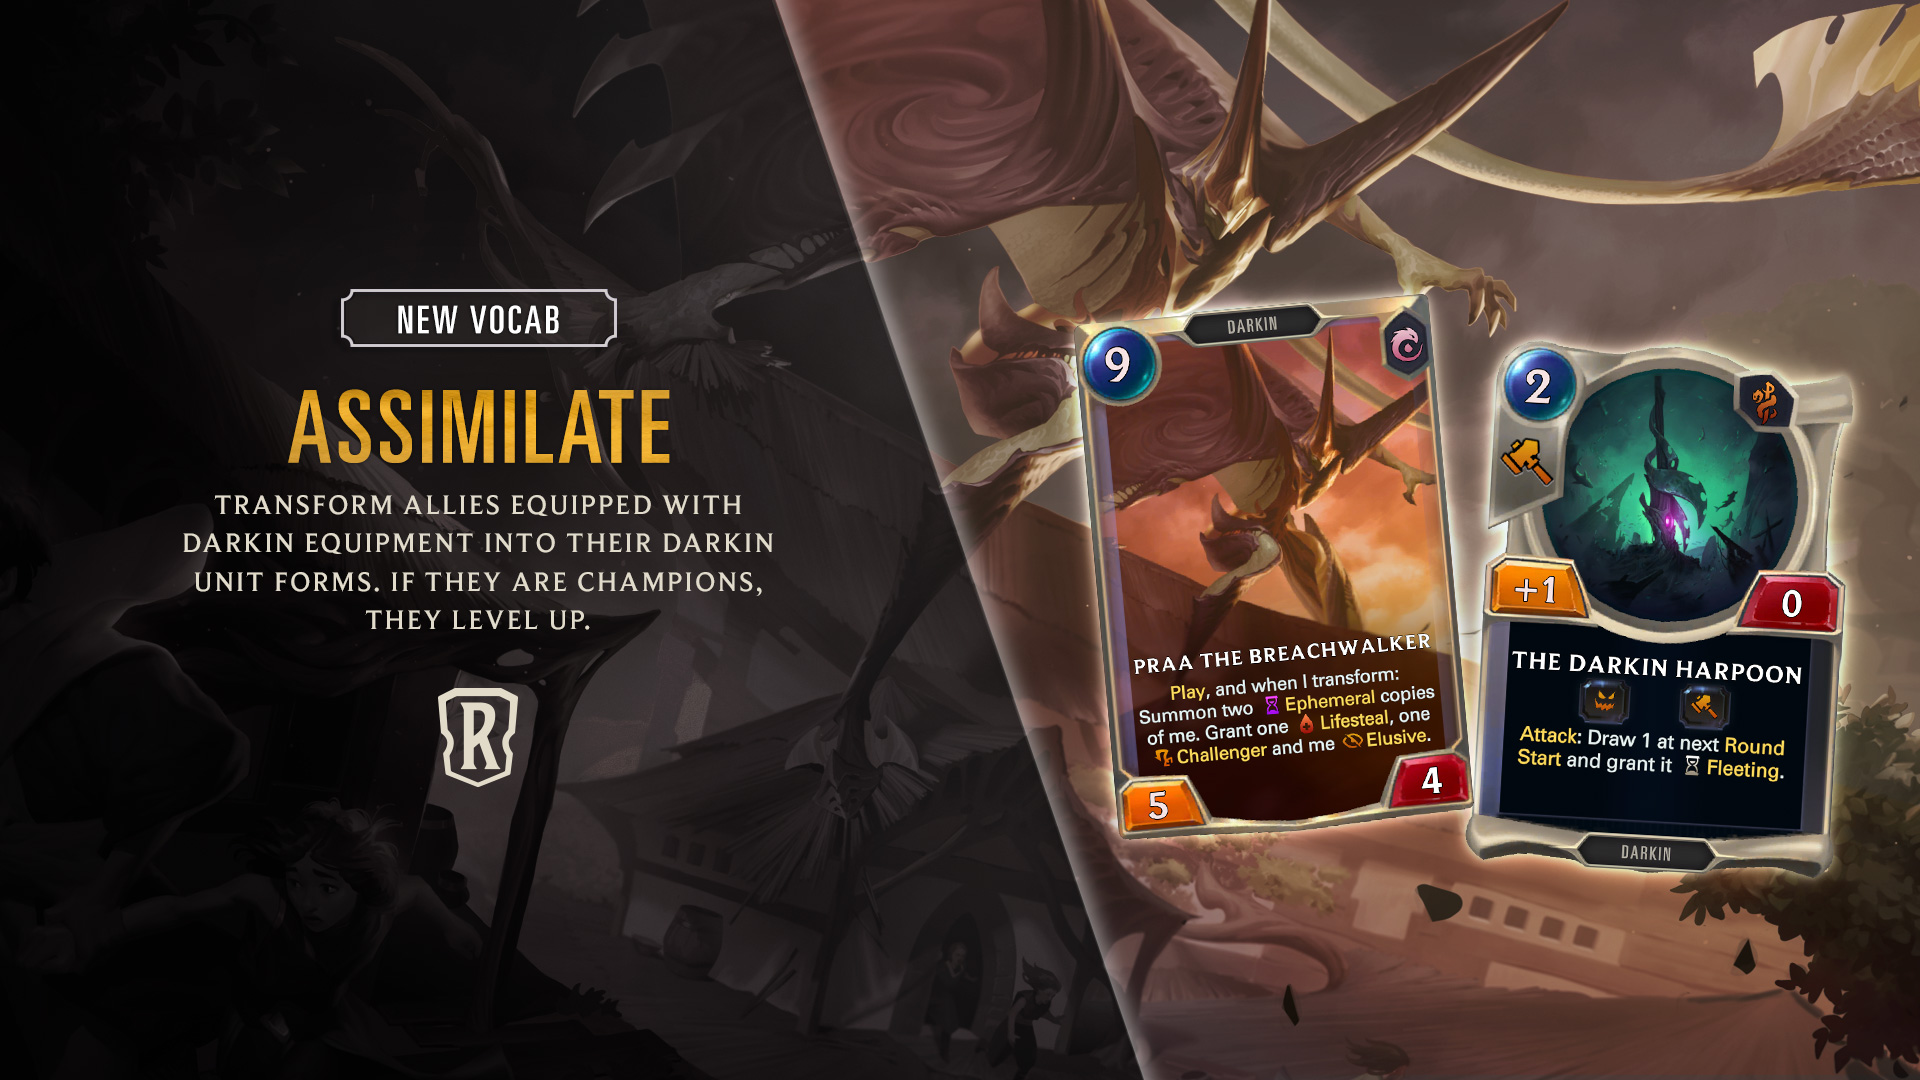 World Ender: New Card Spoilers & Expansion Guide - All Cards Revealed  Today! • News • Legends of Runeterra (LoR) •